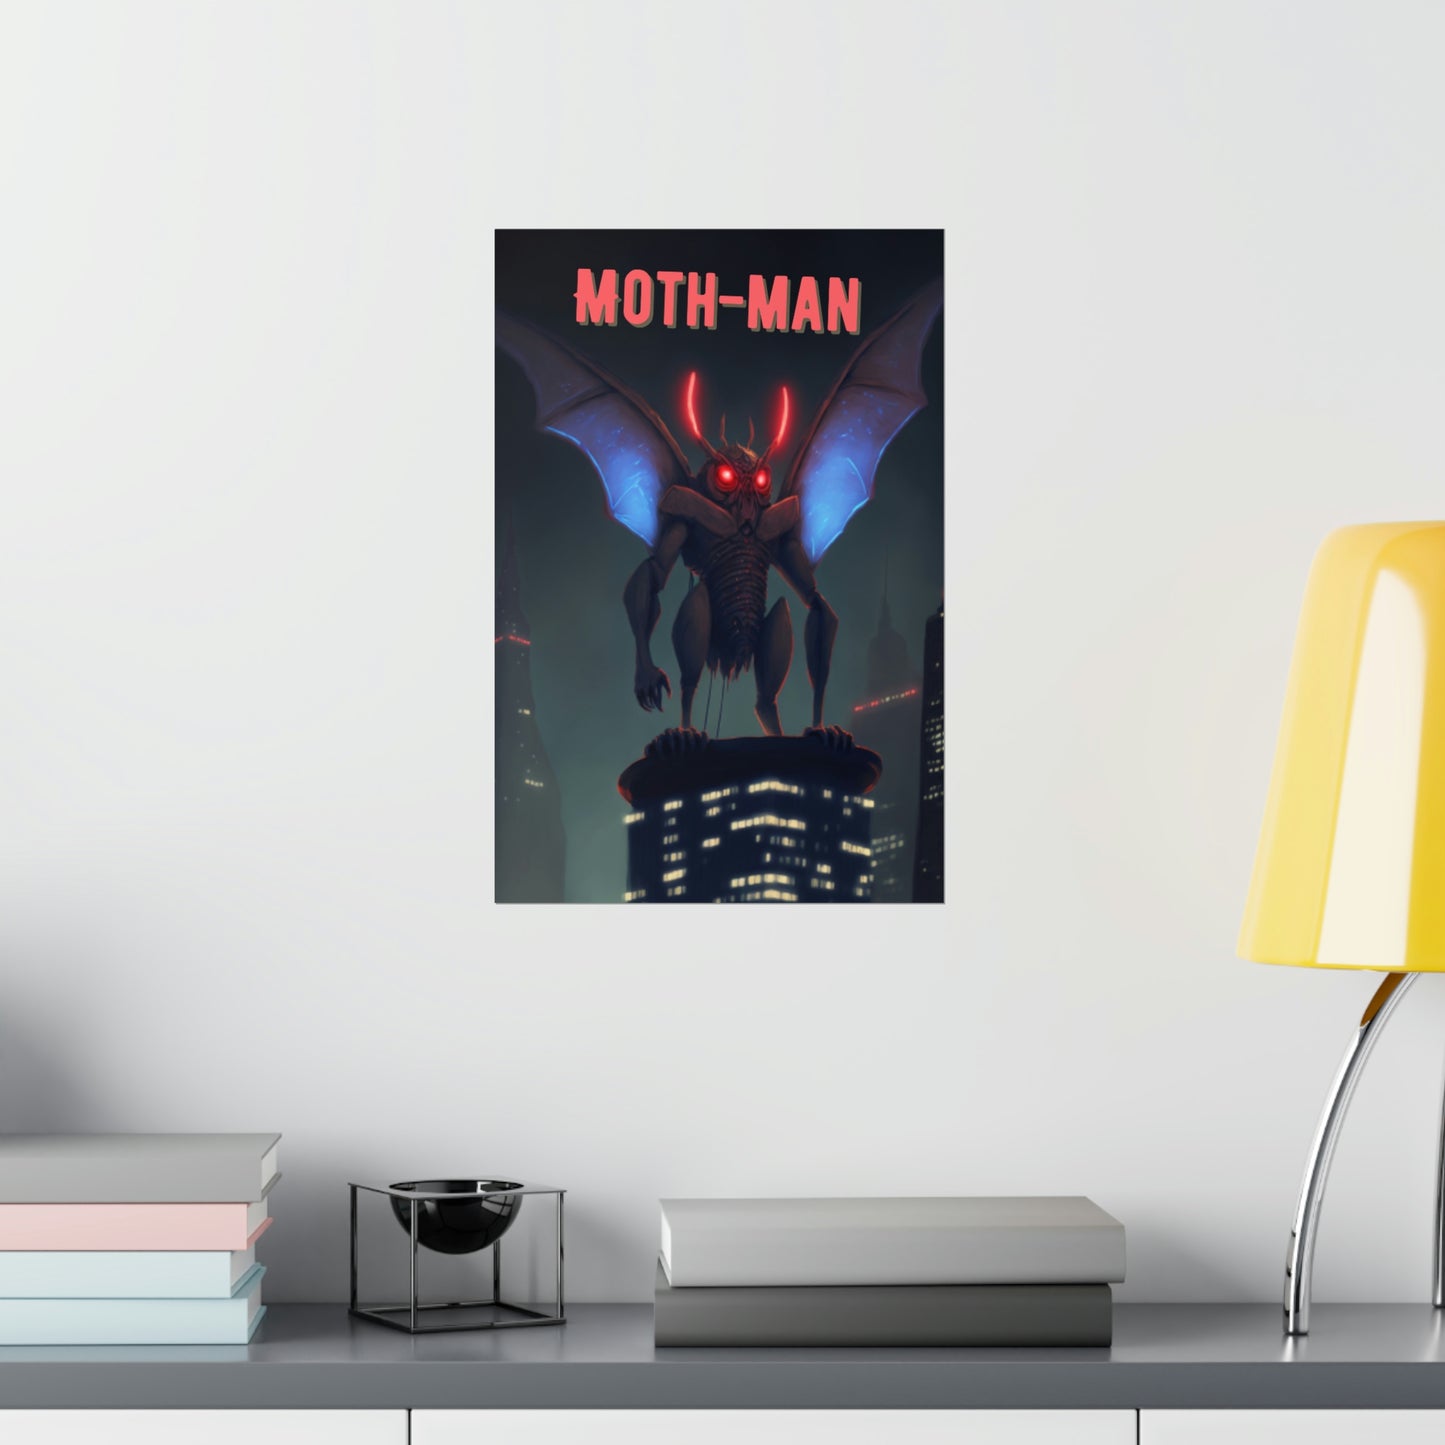 The Guardian Of West Virginia Moth-Man Poster